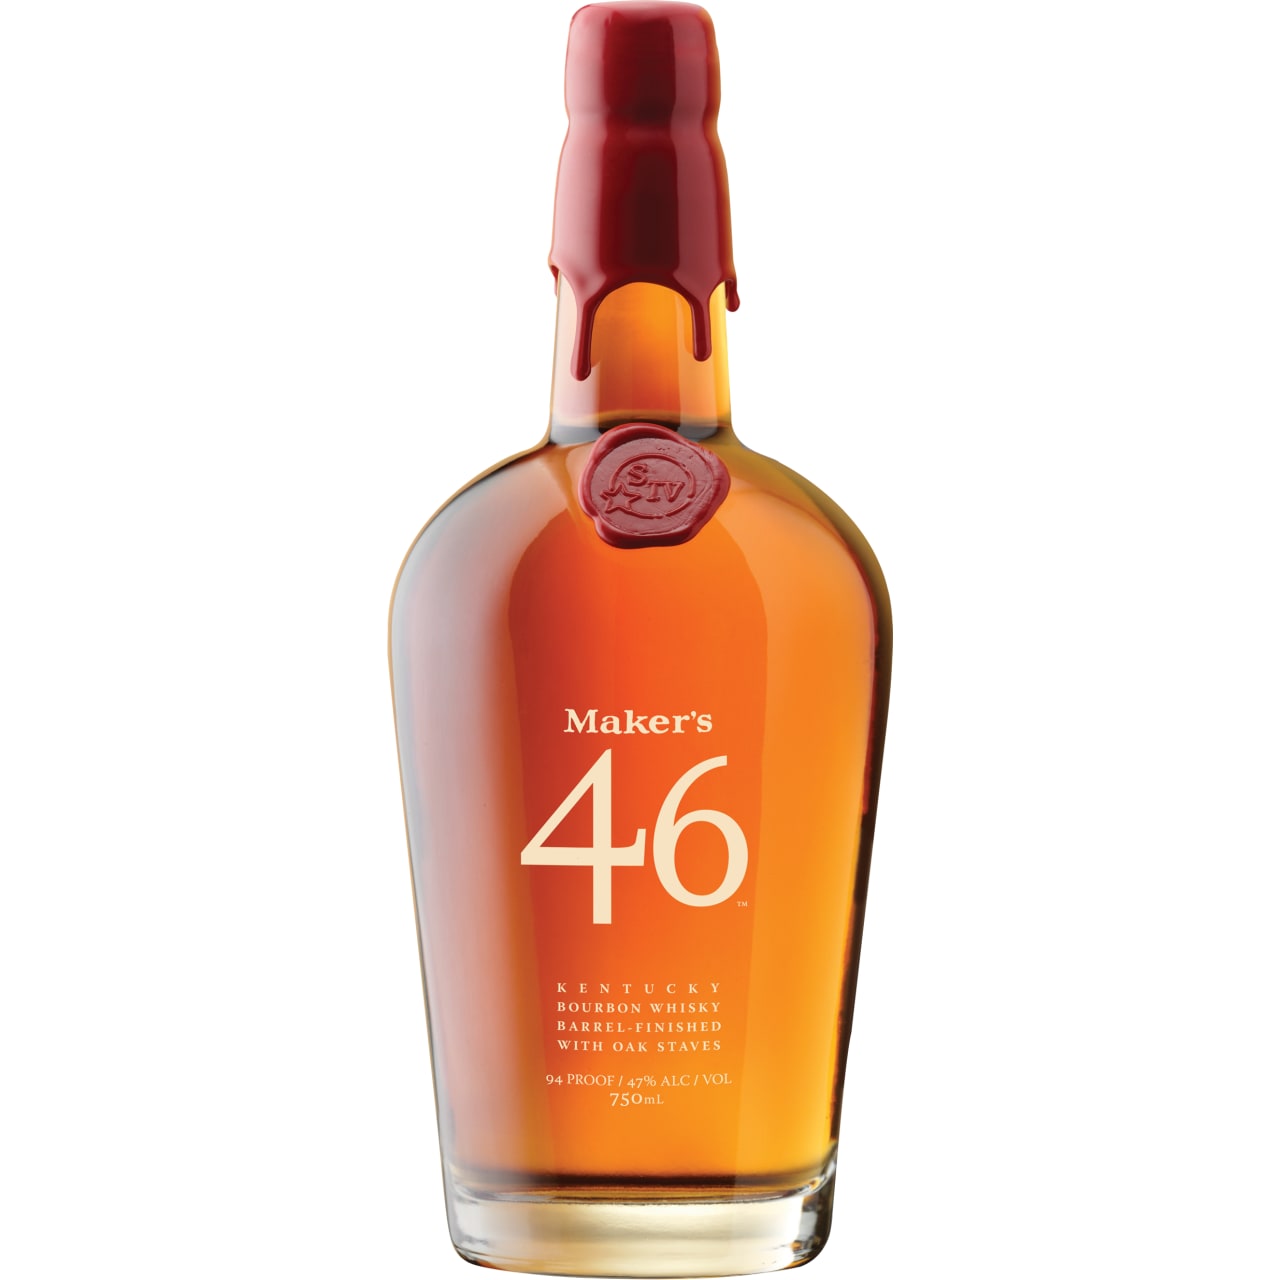 A bold, complex bourbon, but just as approachable and easy to drink as you'd expect from Maker's Mark.